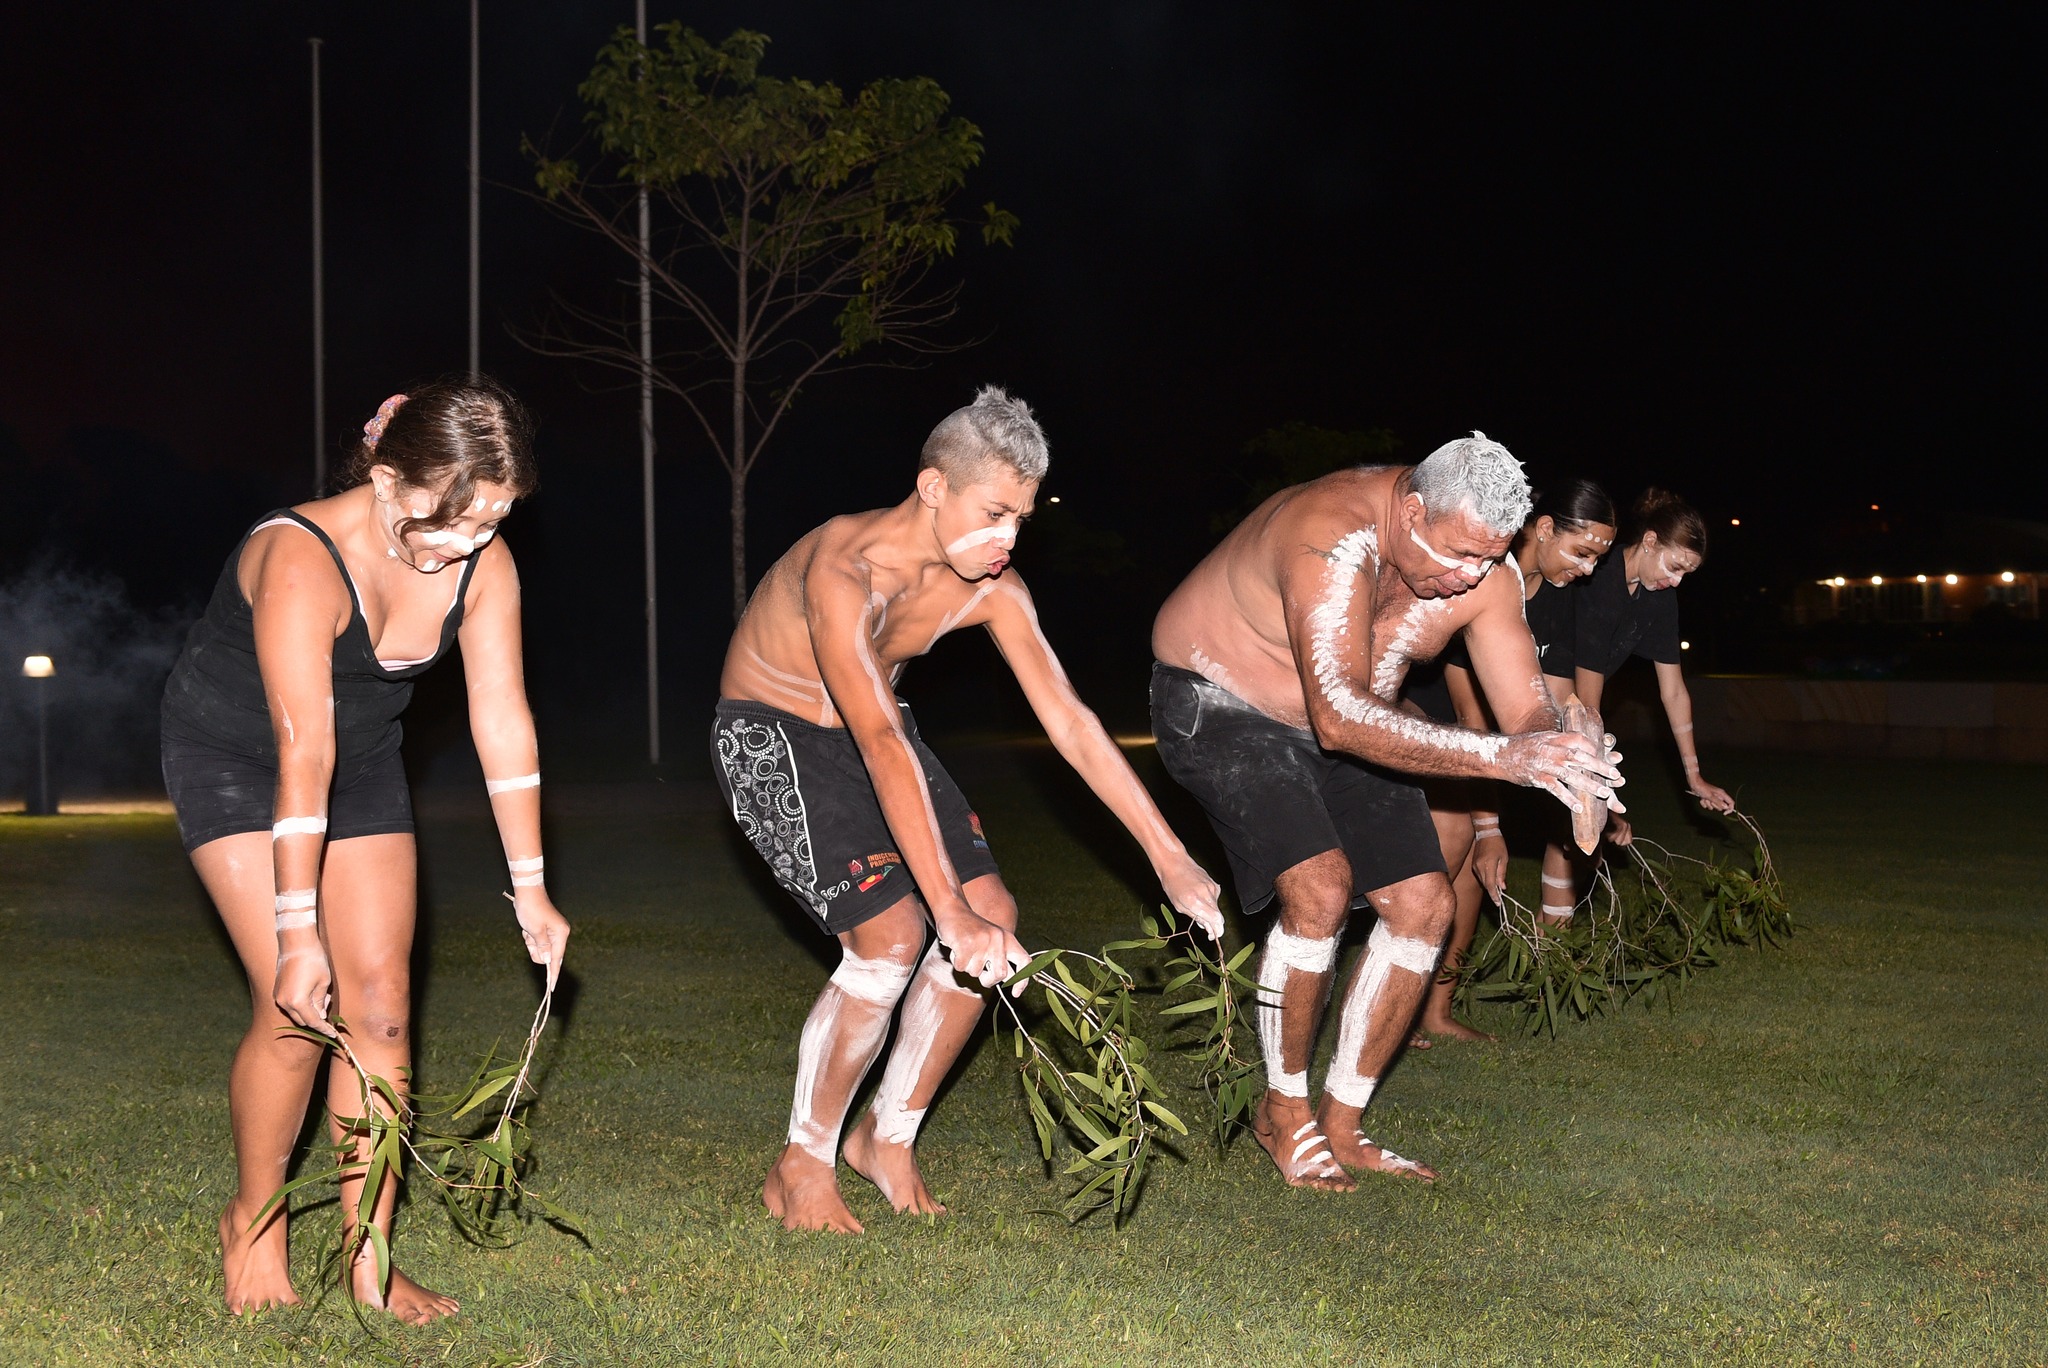 Butchulla man Narvo and members of the Owens Clan perform a ceremonial dance. Photo: Alistair Brightman